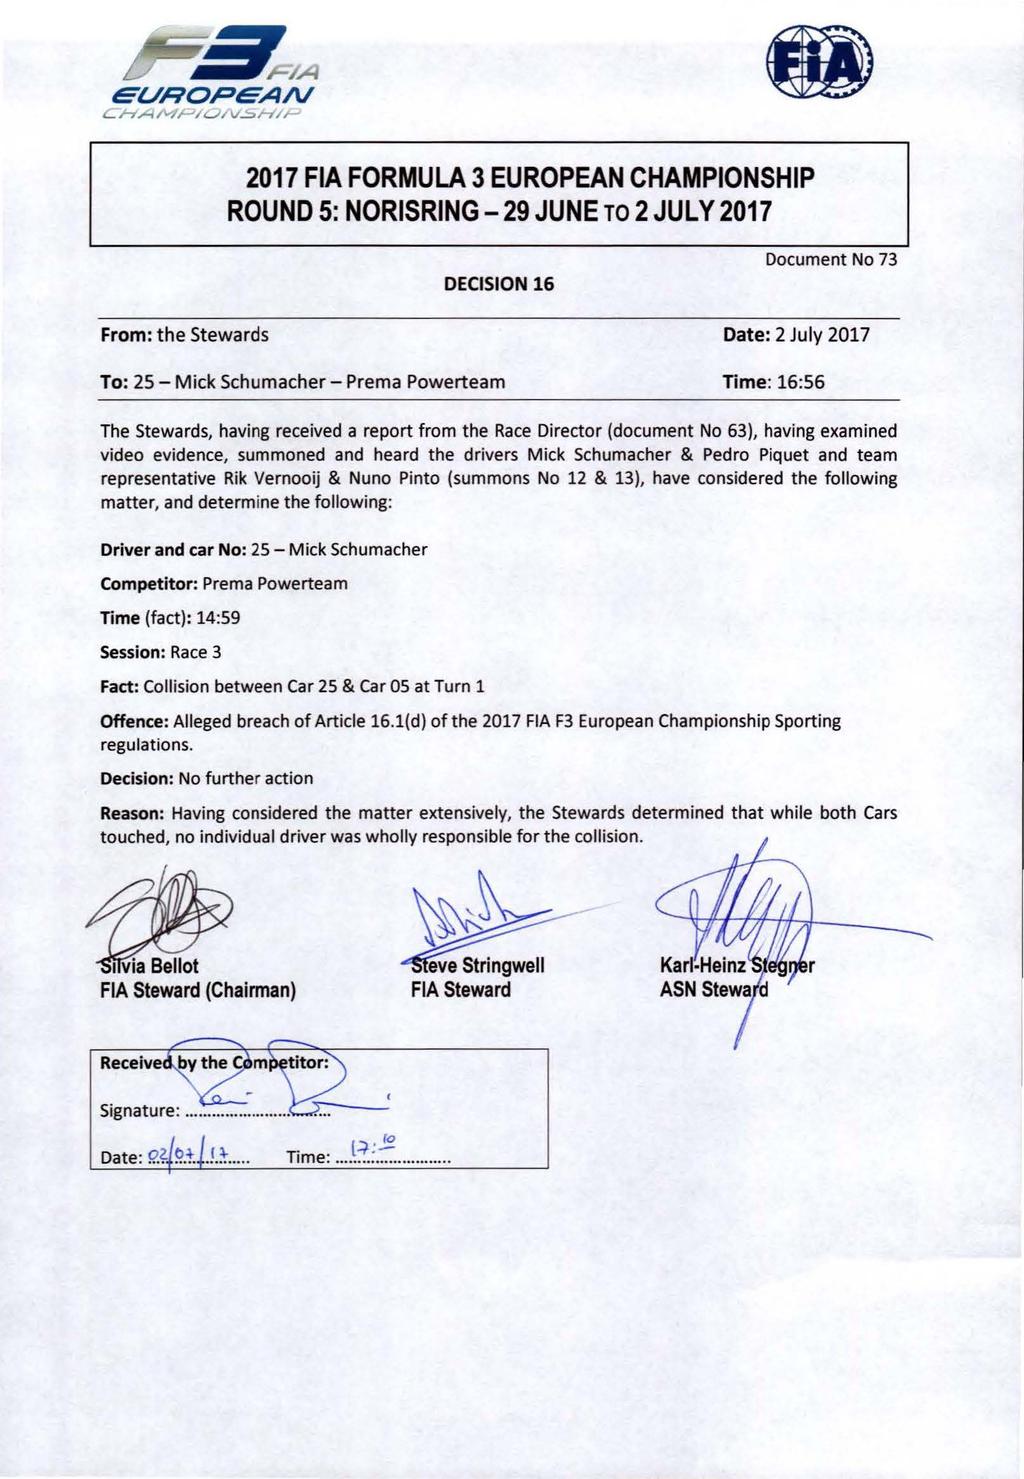 ROUND 5: NORISRING -29 JUNE TO 2 JUL Y 2017 DECISION 16 Document No 73 From: the Stewards Date: 2 July 2017 To: 25 - Mick Schumacher - Prema Powerteam Time: 16:56 The Stewards, having received a